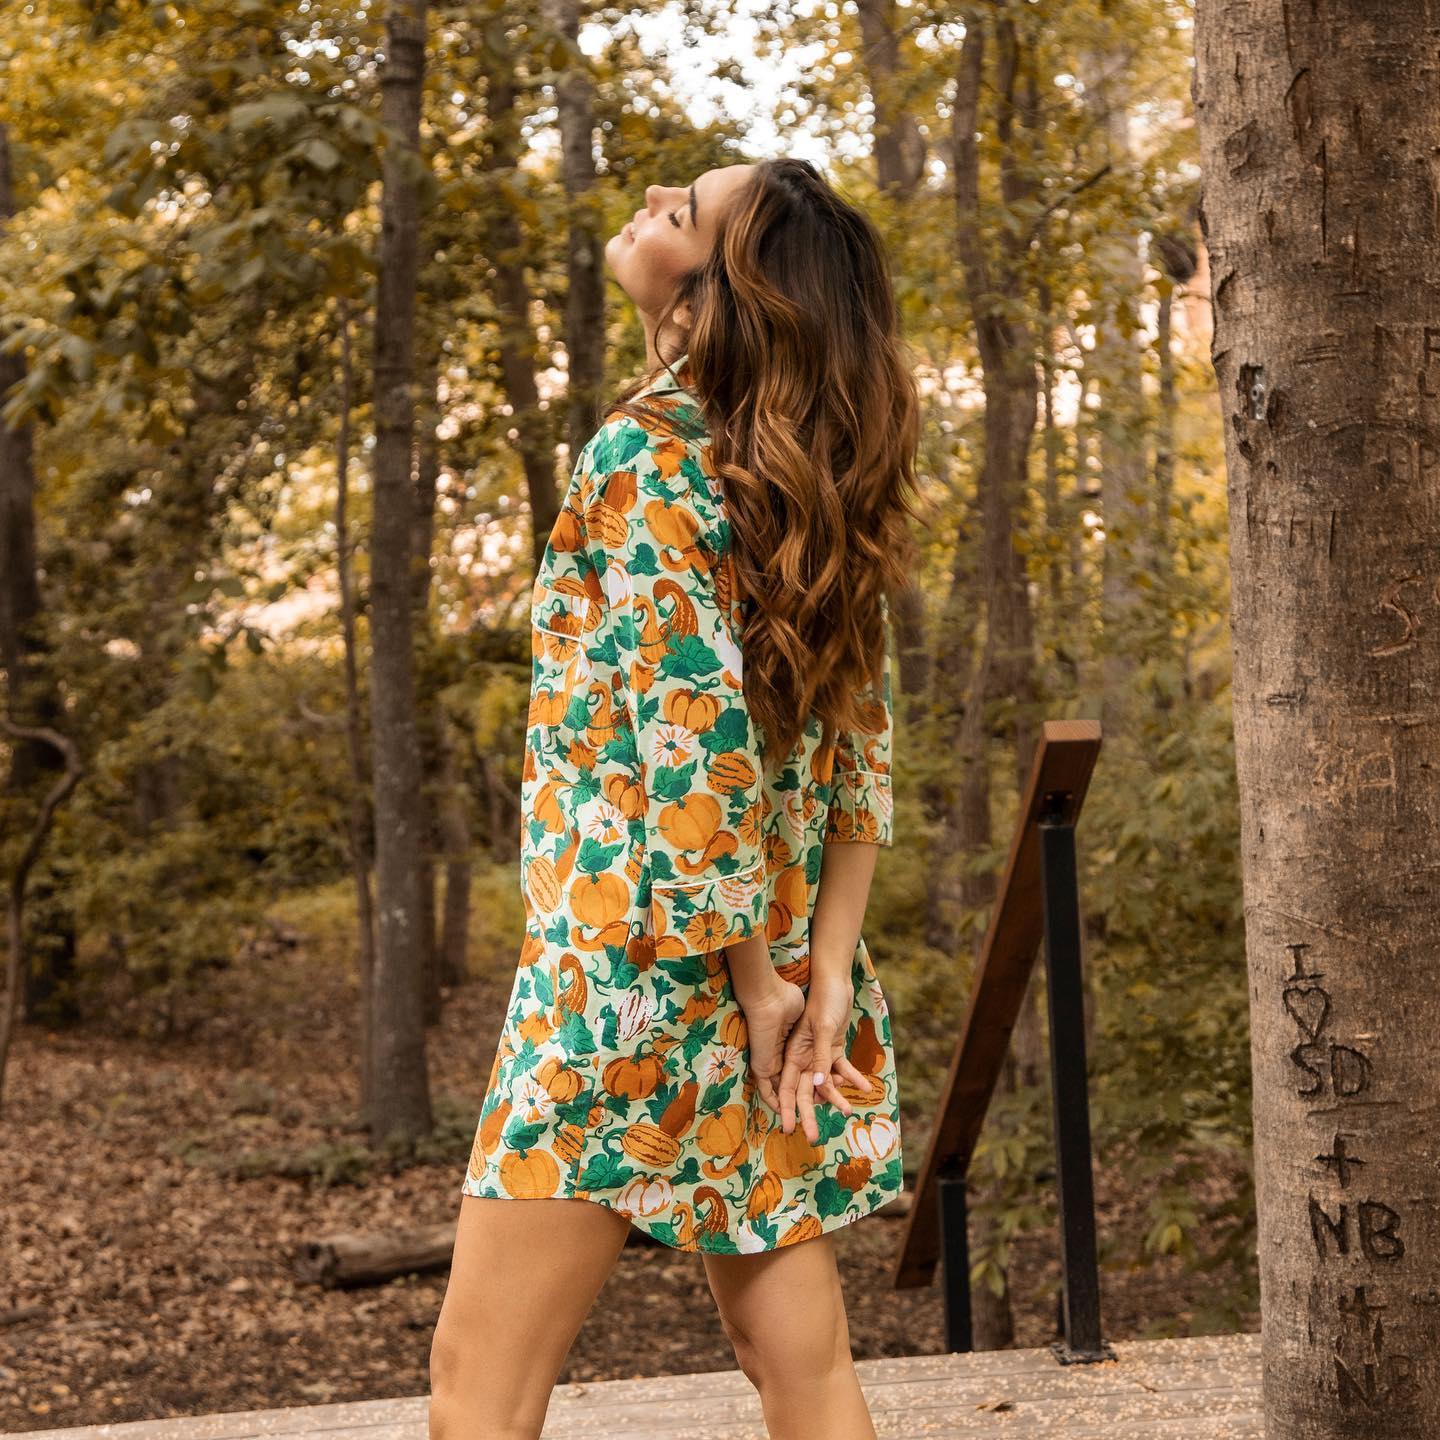 Rachell Vallori wears Printfresh Floral Outfits during Photoshoot, Oct 2022 4